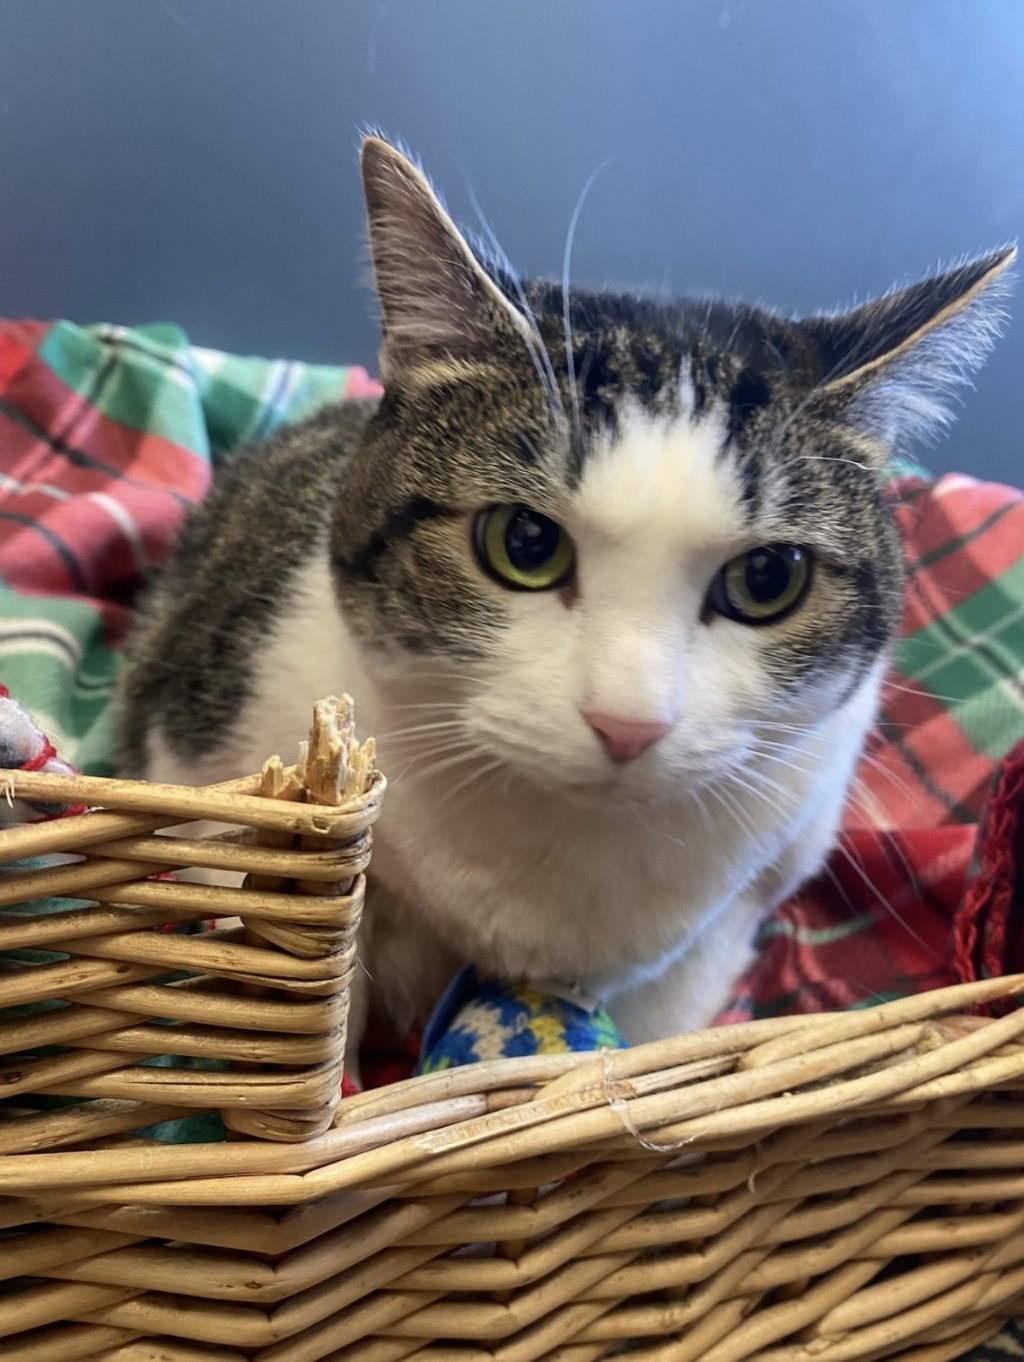 Meet sweet Minka! She is a super friendly girl who loves her naps! Minka doesn’t take the best care of her fur, and instead enjoys being brushed often. Daughter to Mama, they have a great bond and love to be near each other! Minka is available for adoption, come meet this amazing girl!